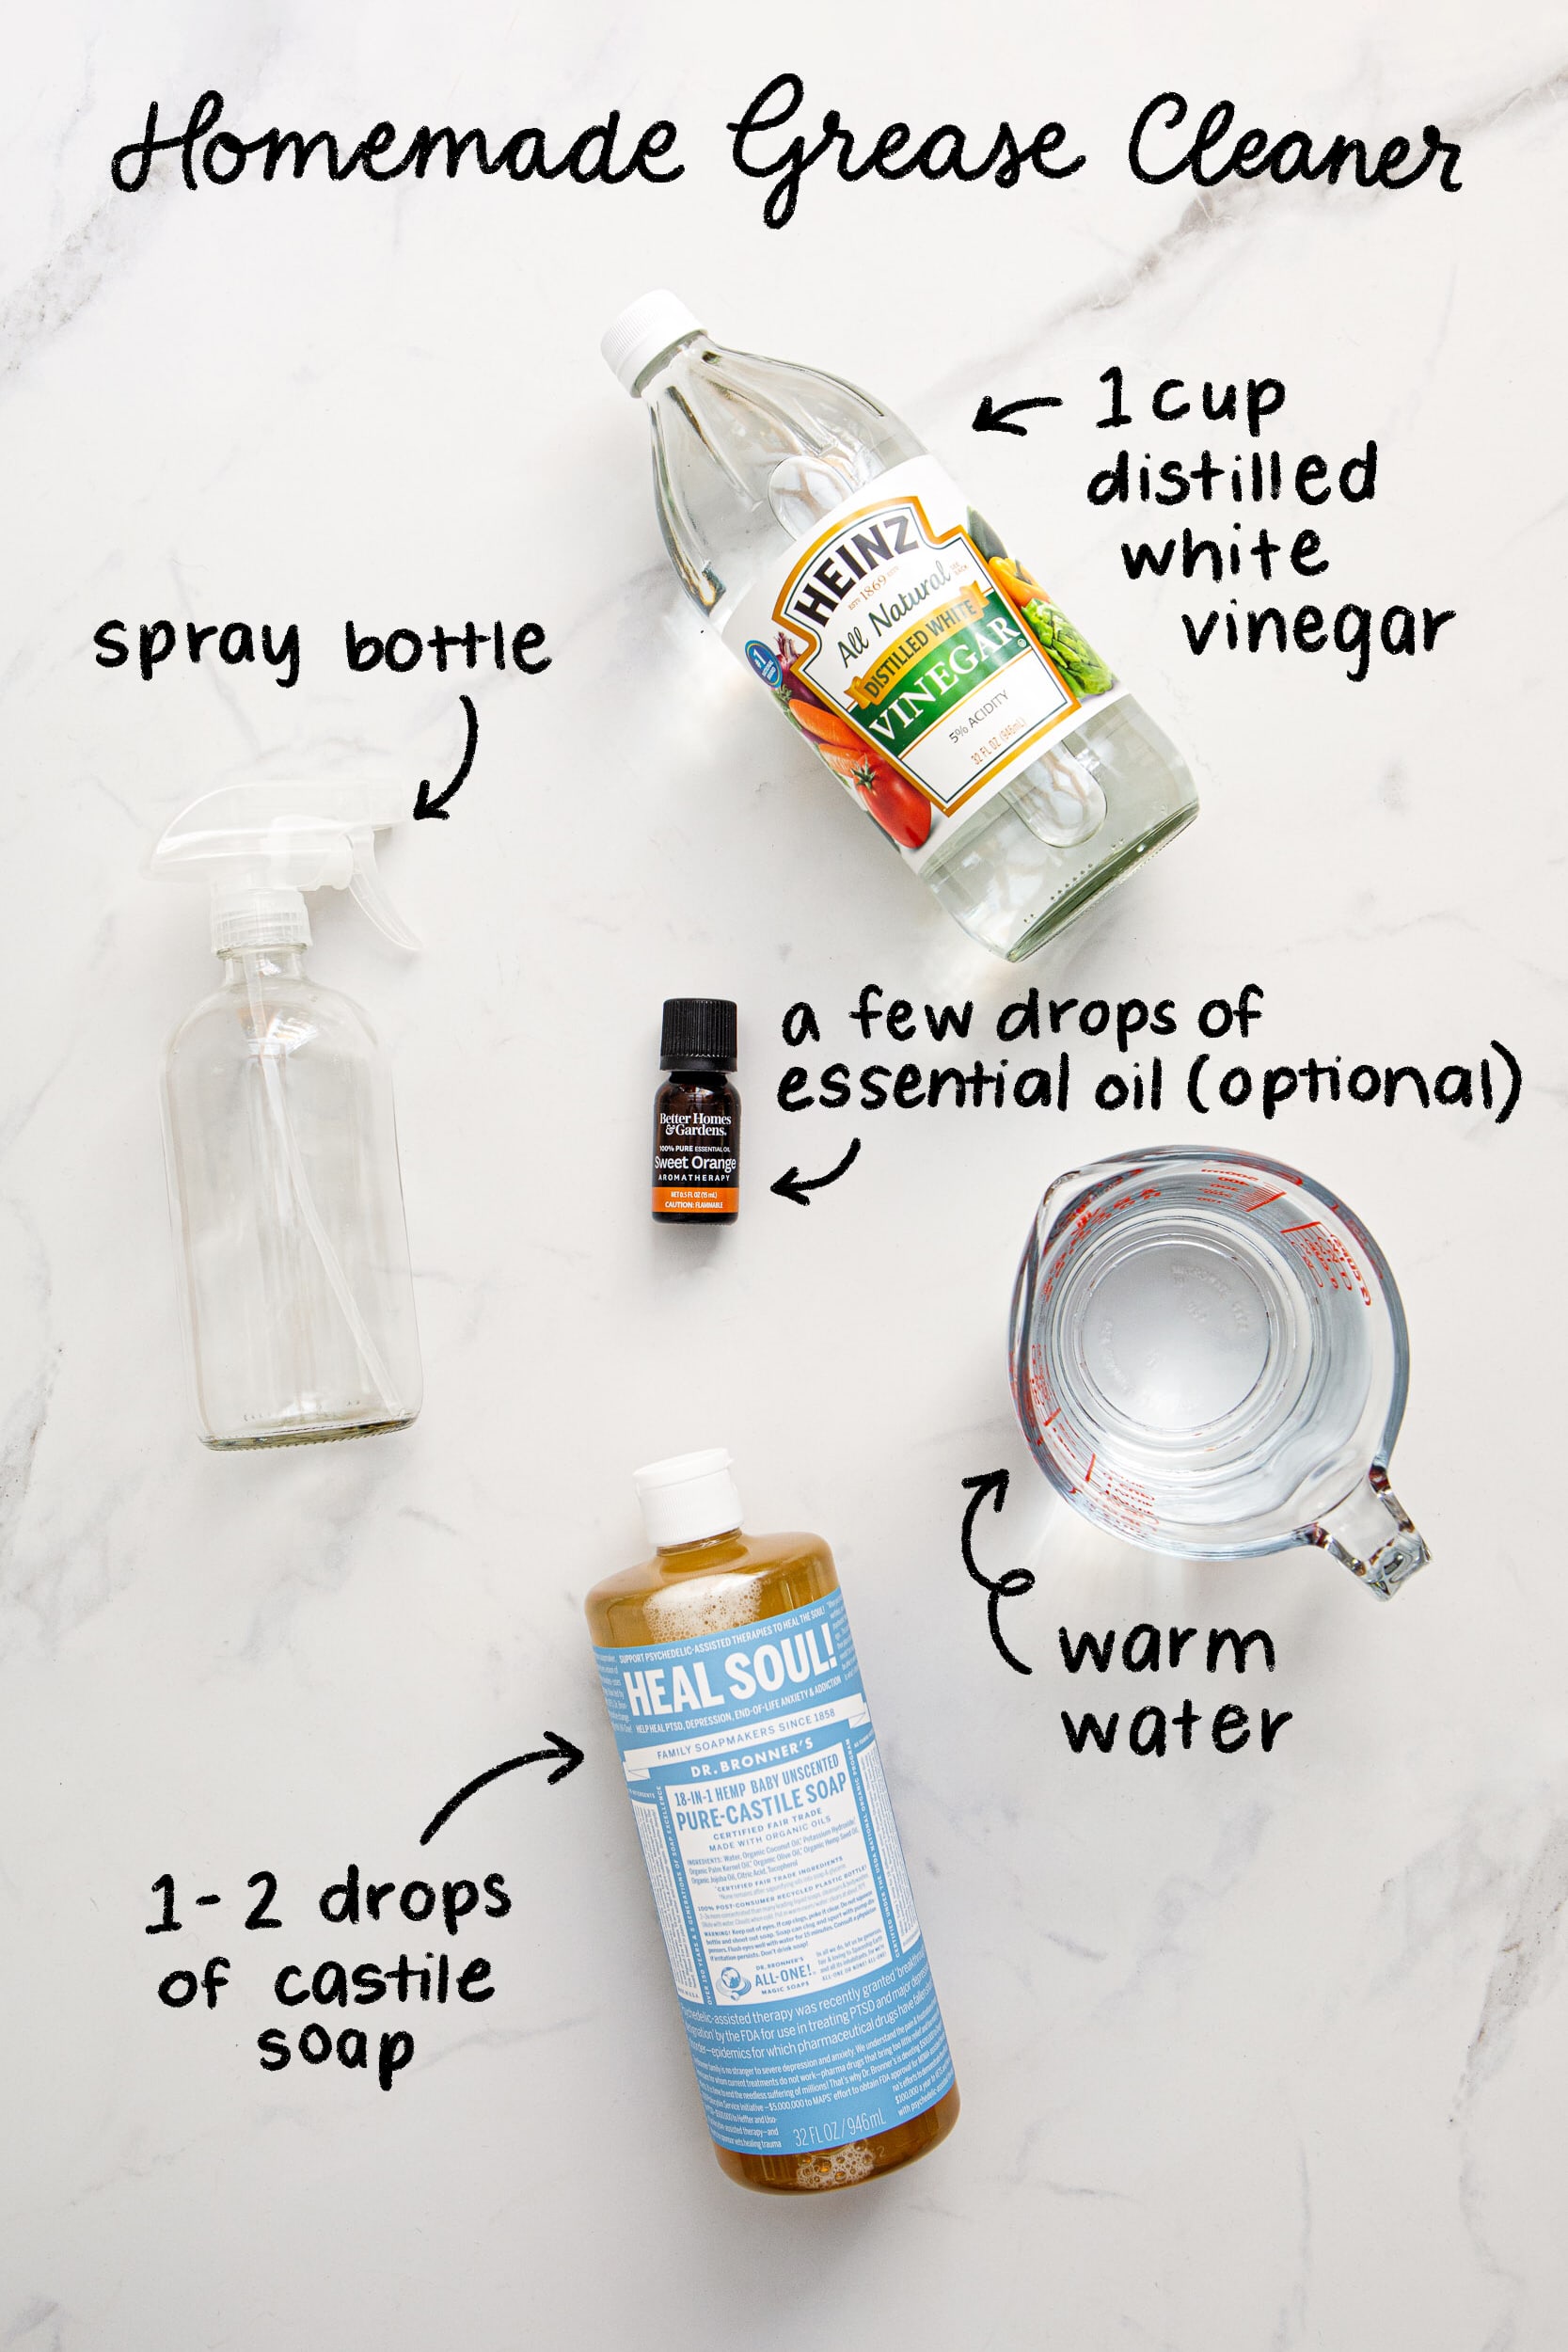 How to Make DIY All-Purpose Cleaner 3 Ways